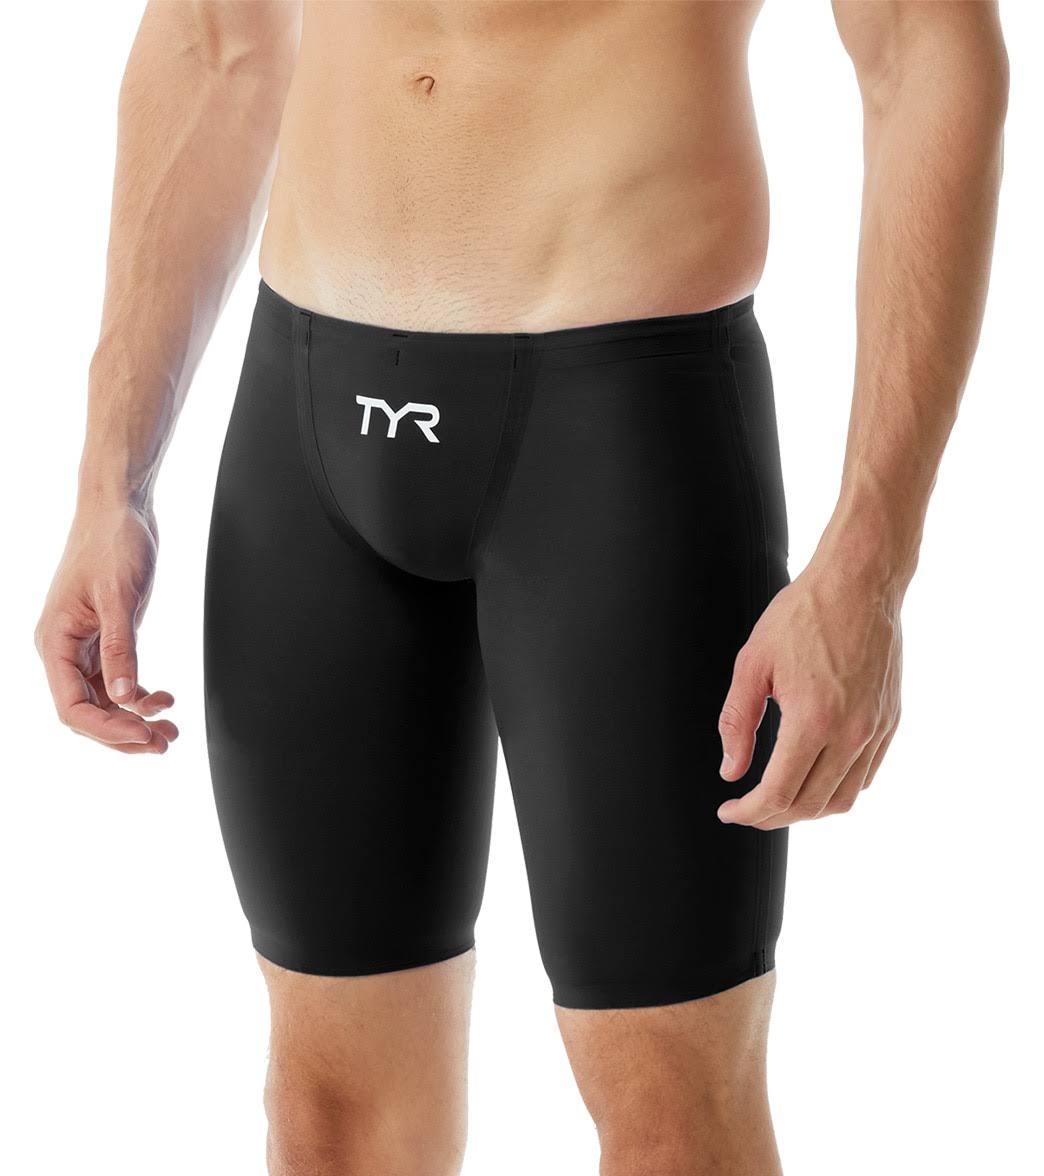 TYR Invictus Solid Jammer Black - 26